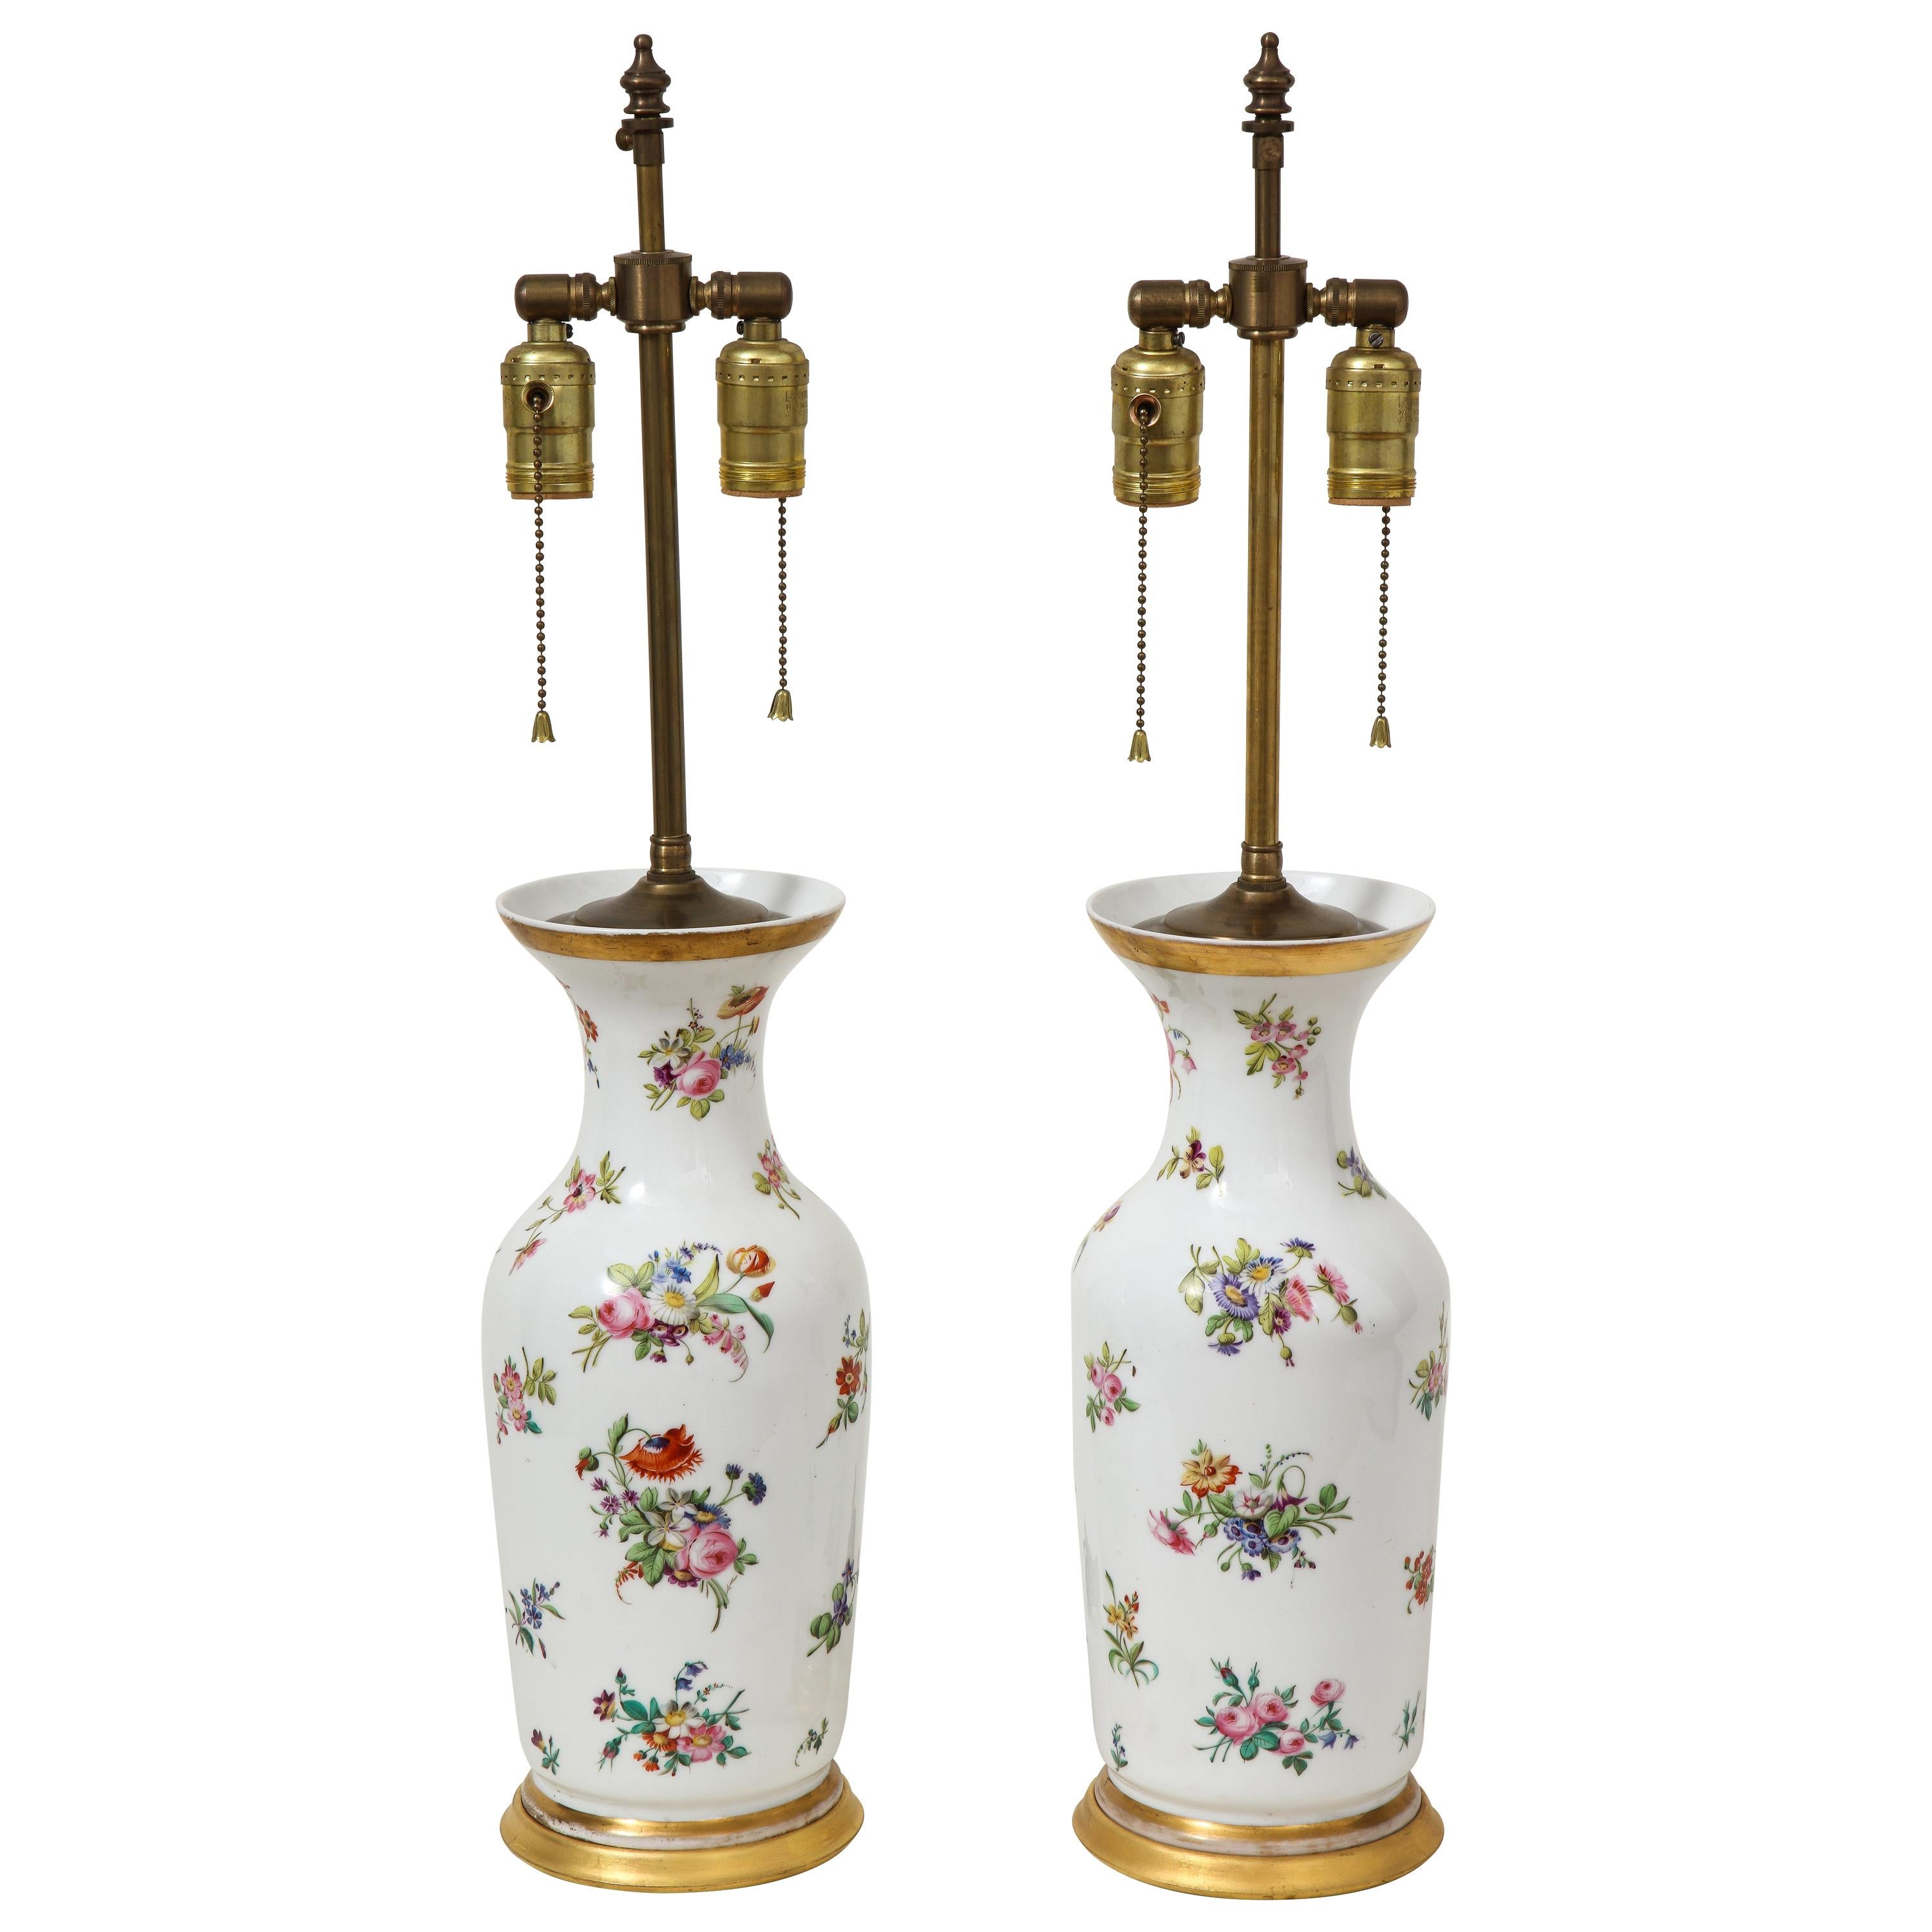 Pair of Victorian Porcelain Polychrome Decorated Vases Mounted as Lamps